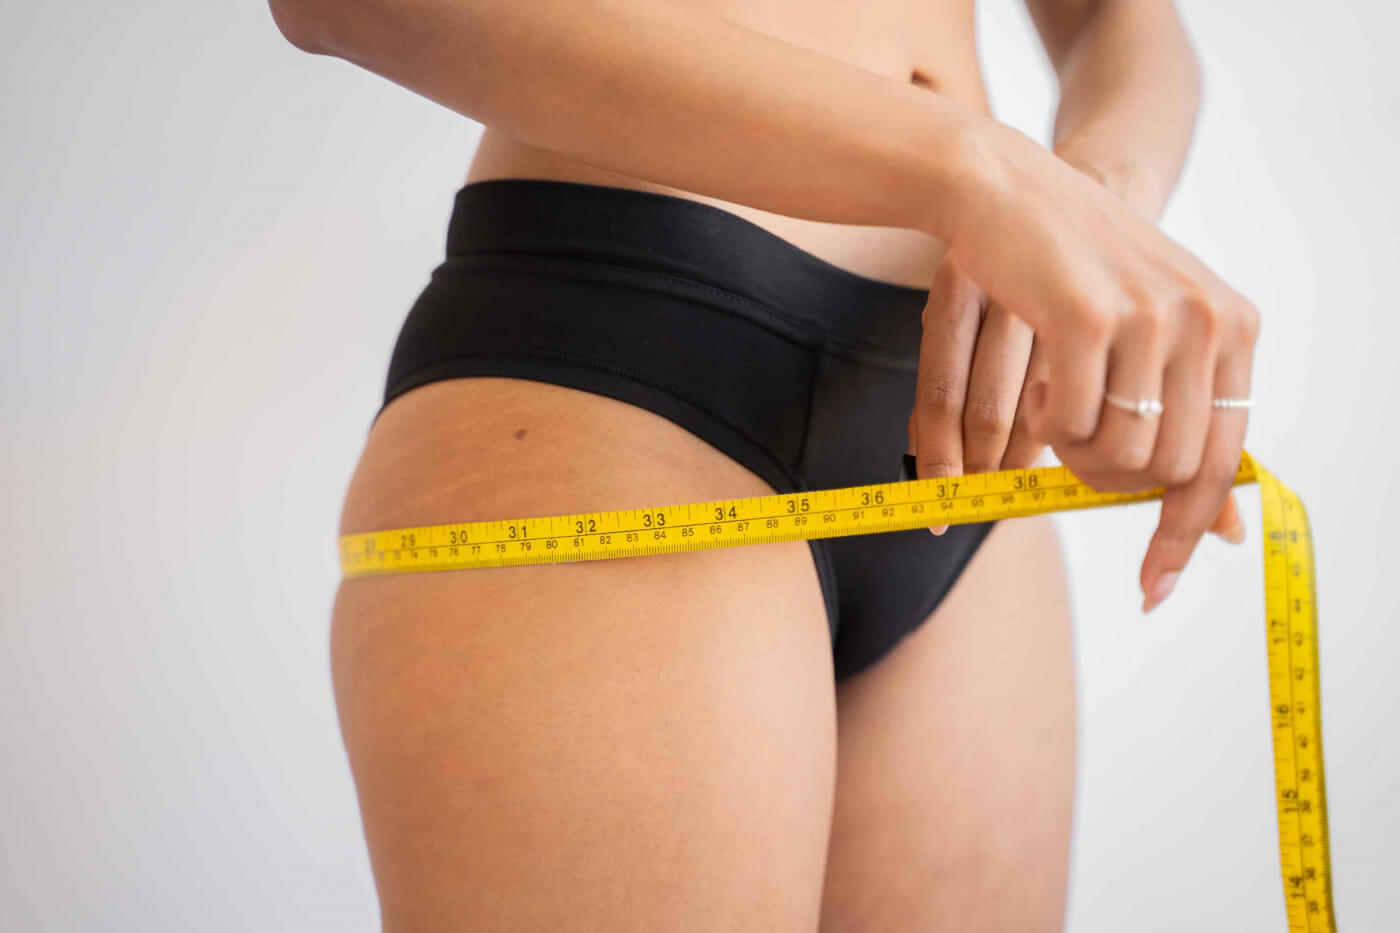 Can Collagen Powder Cause You To Gain Weight?